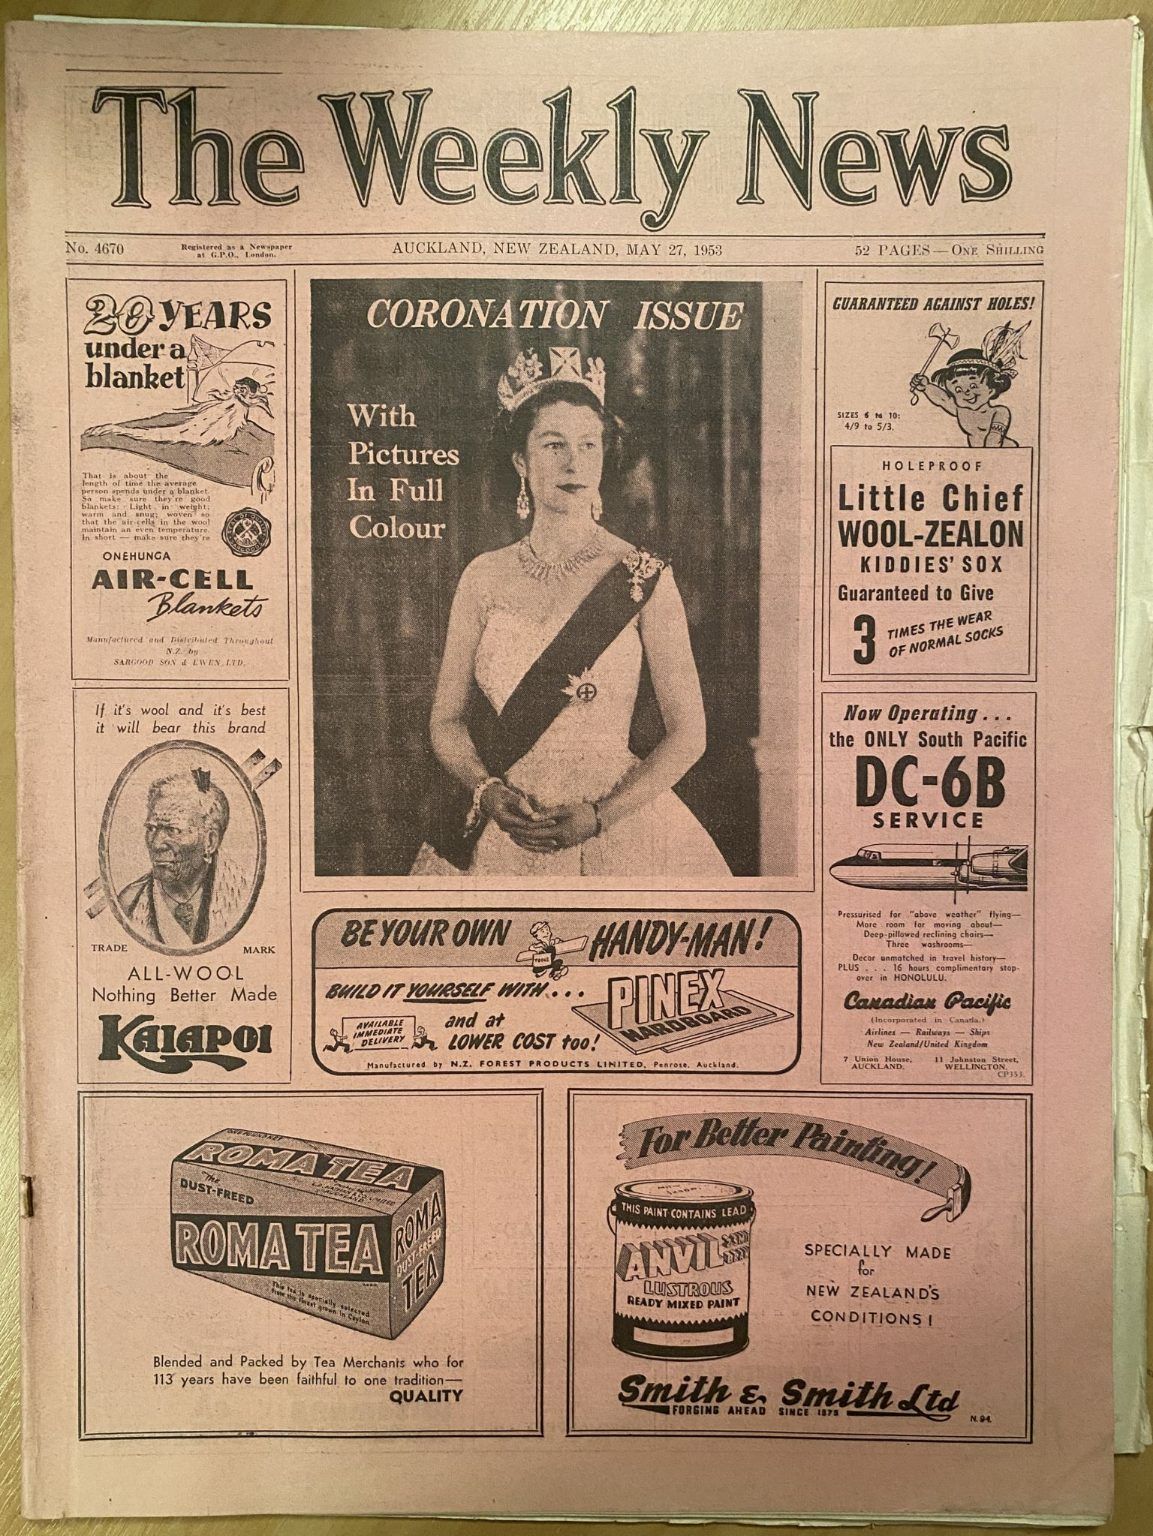 OLD NEWSPAPER: The Weekly News - No. 4670, 27 May 1953